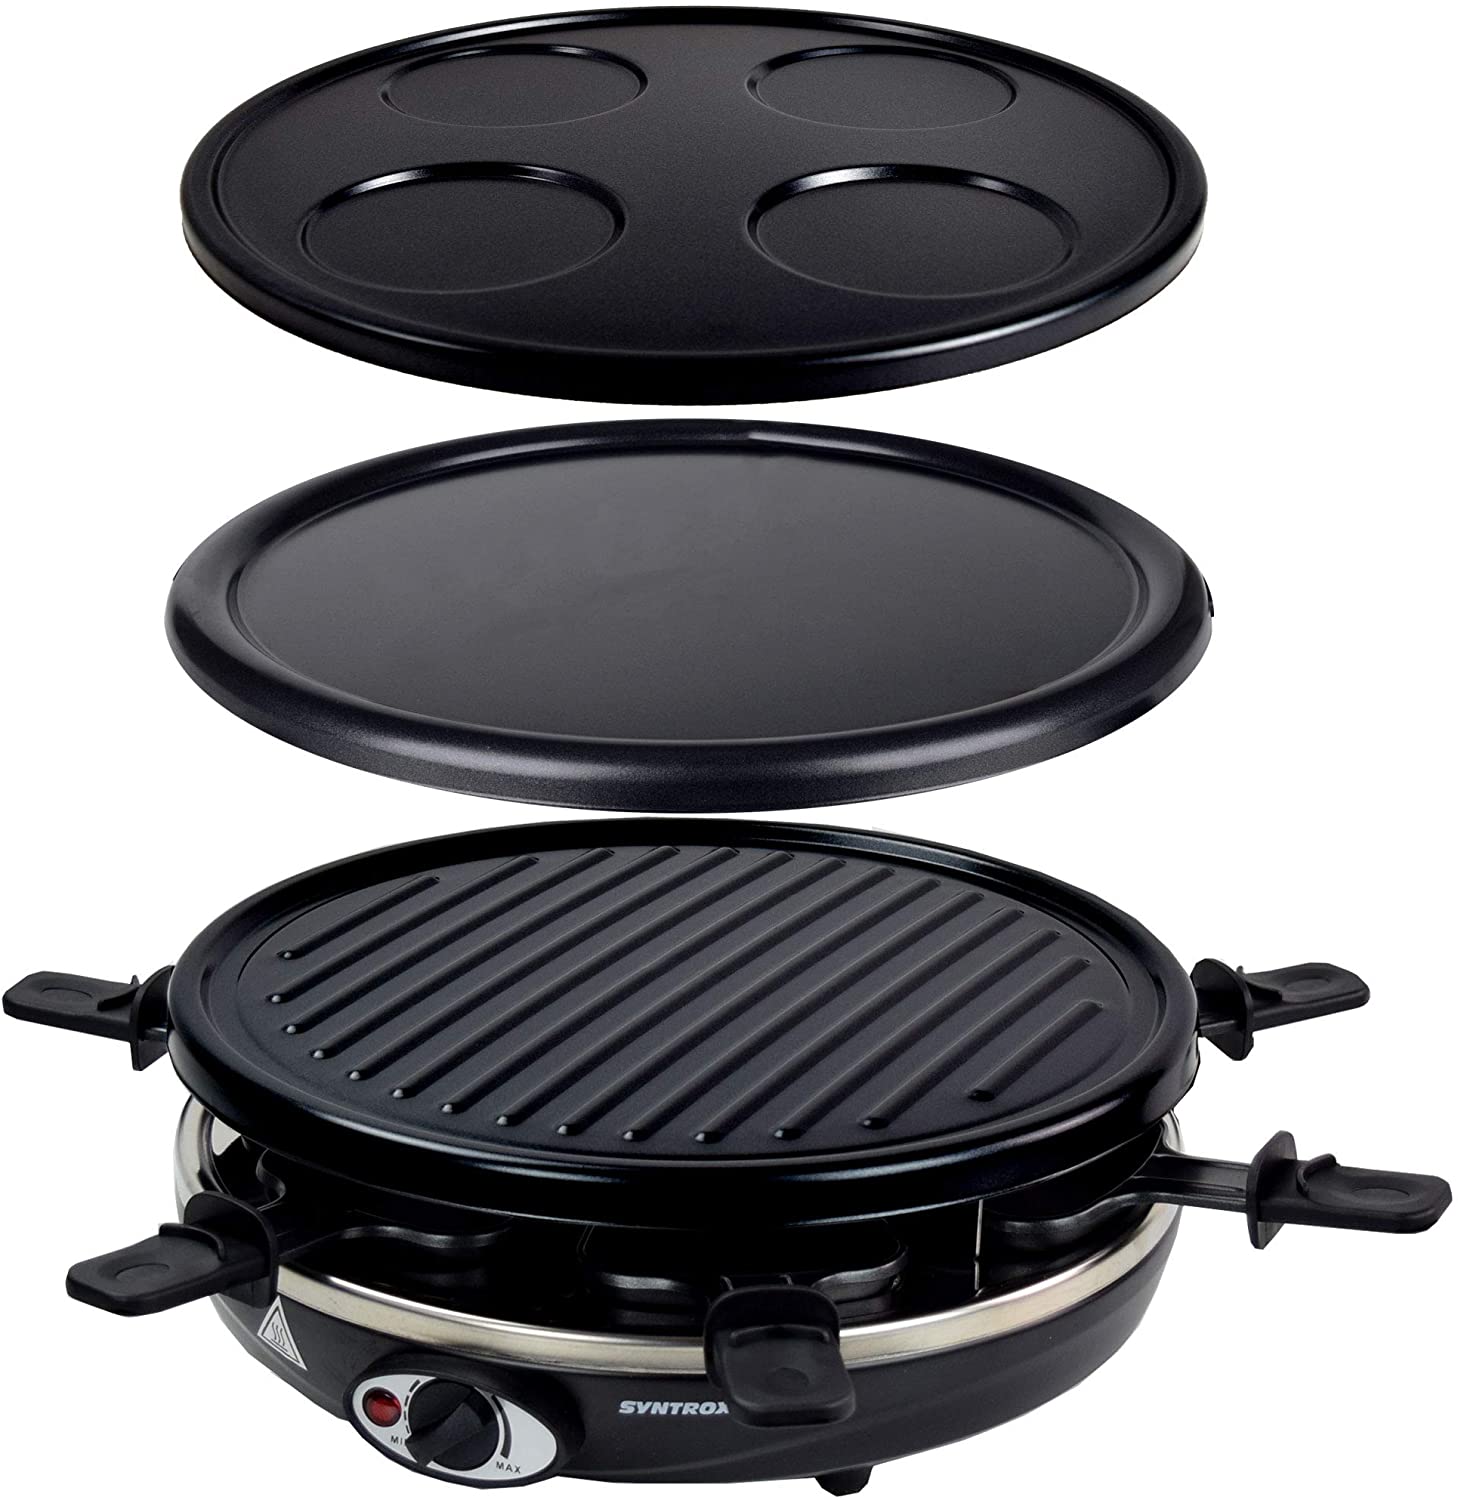 Syntrox Basel Raclette Crepe Maker 4-in-1 Grill Pancake Maker for 6 People Non-Stick